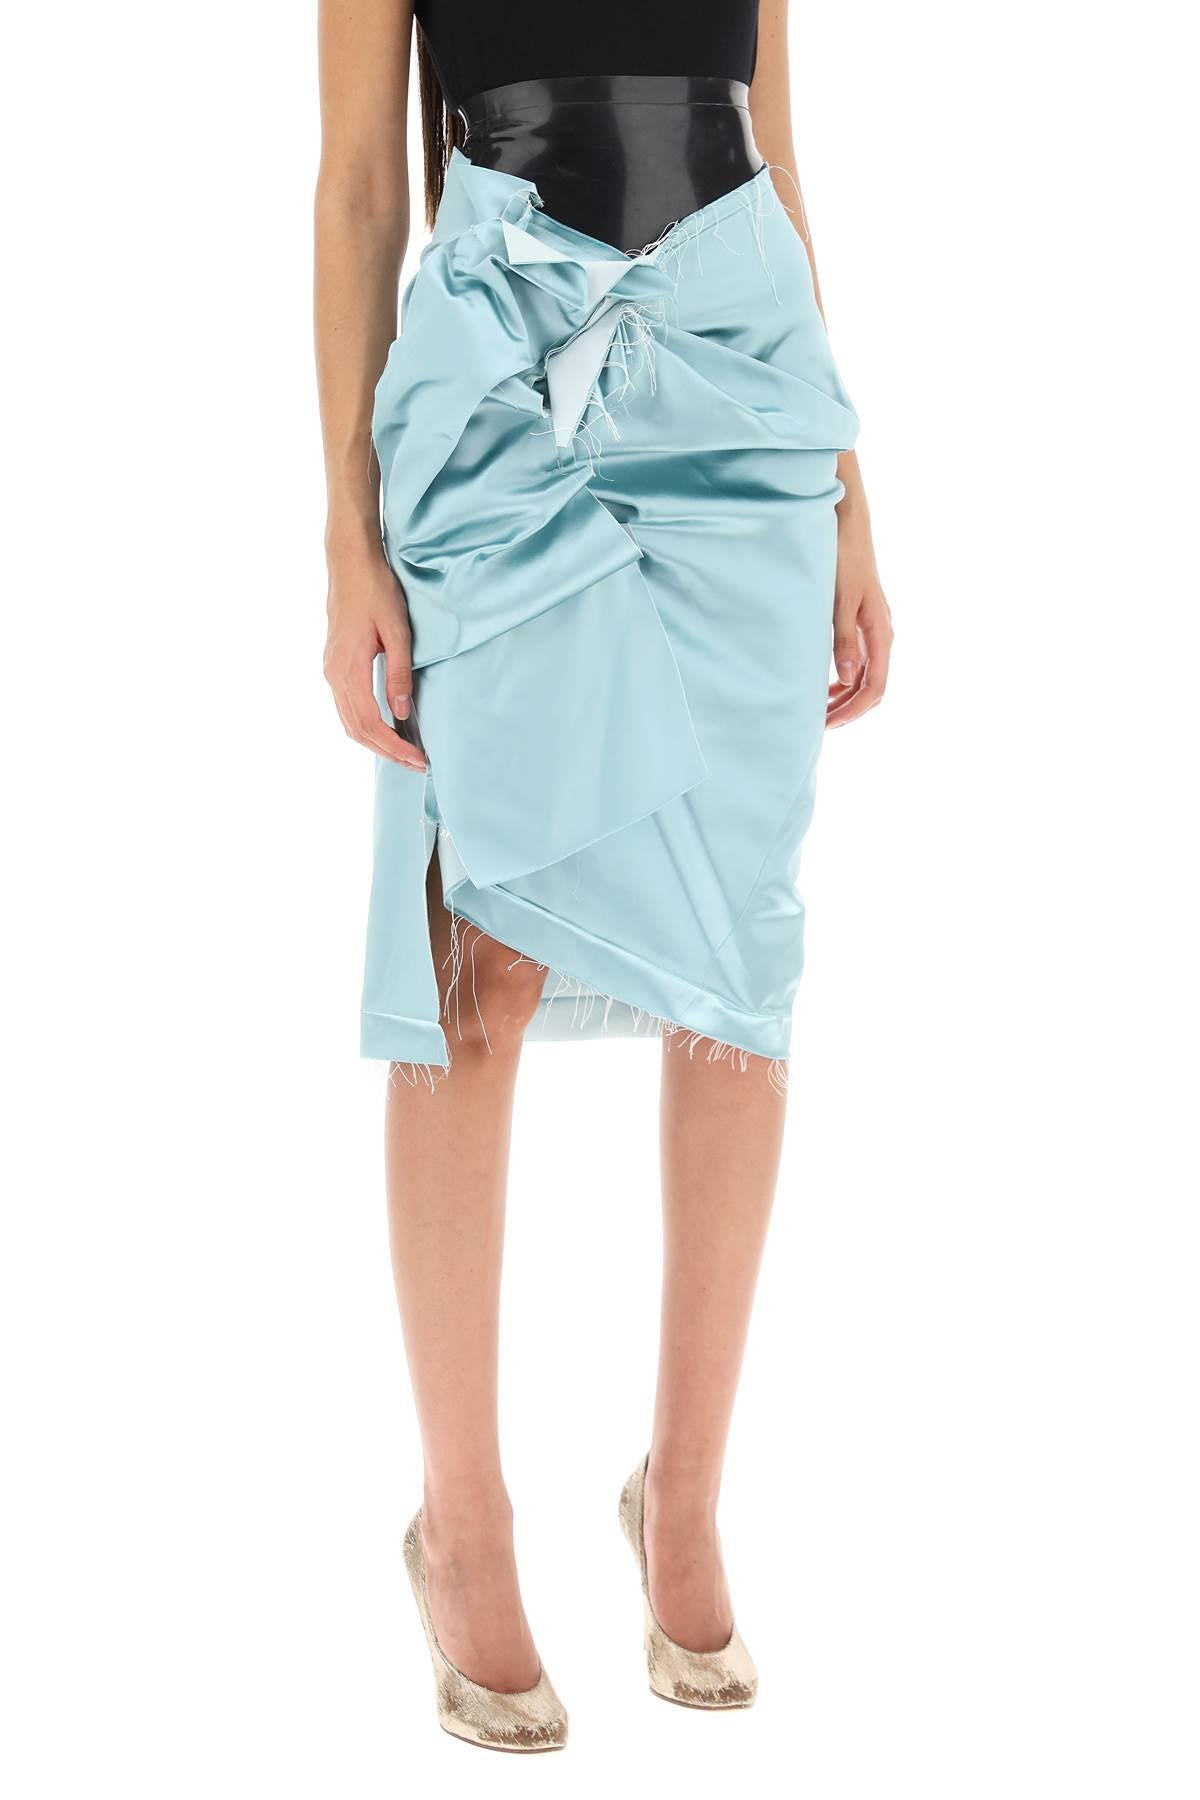 Maison margiela decortique skirt with built-in briefs in latex-1